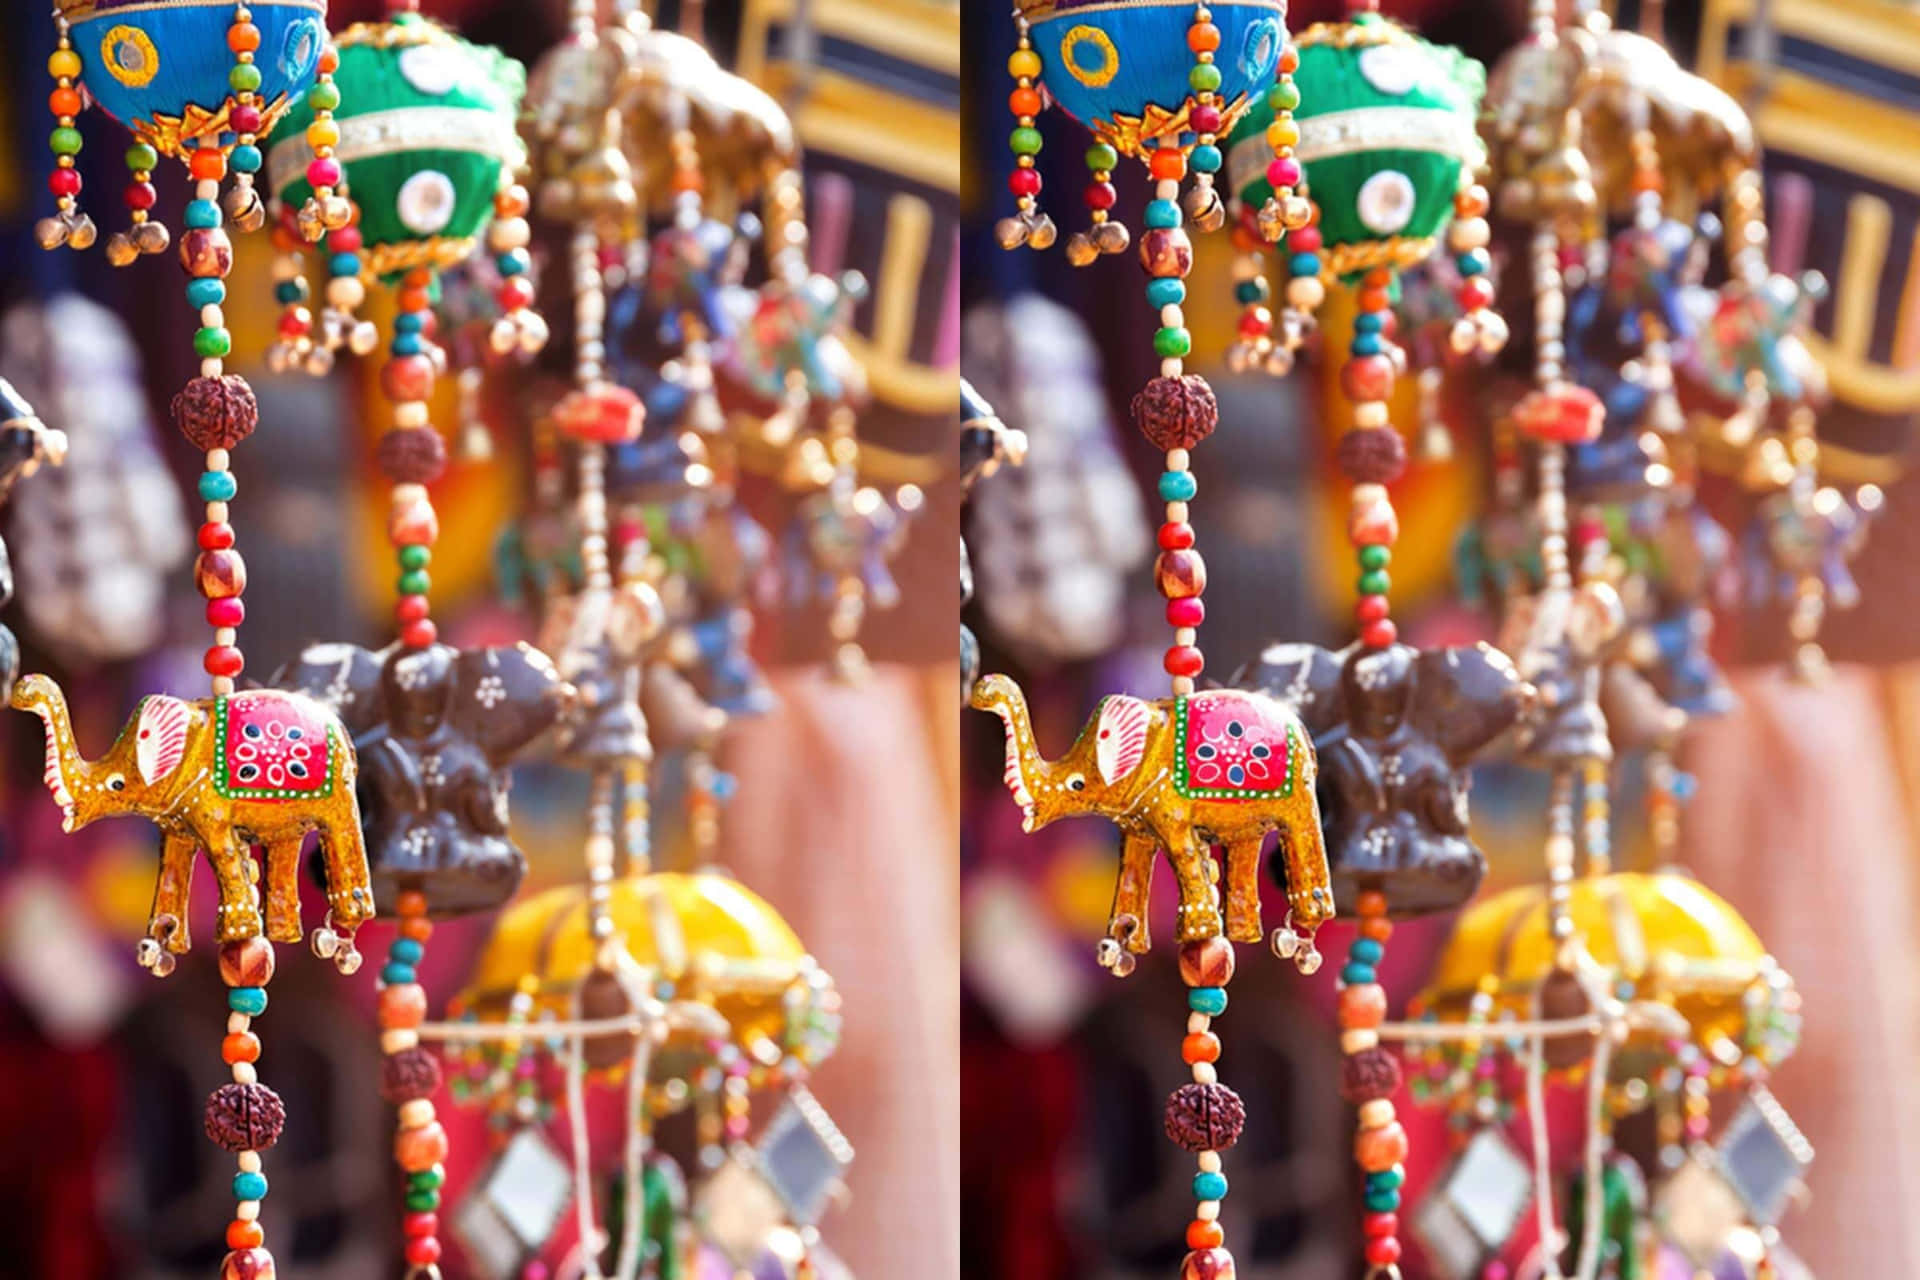 A Colorful Display Of Beads And Ornaments